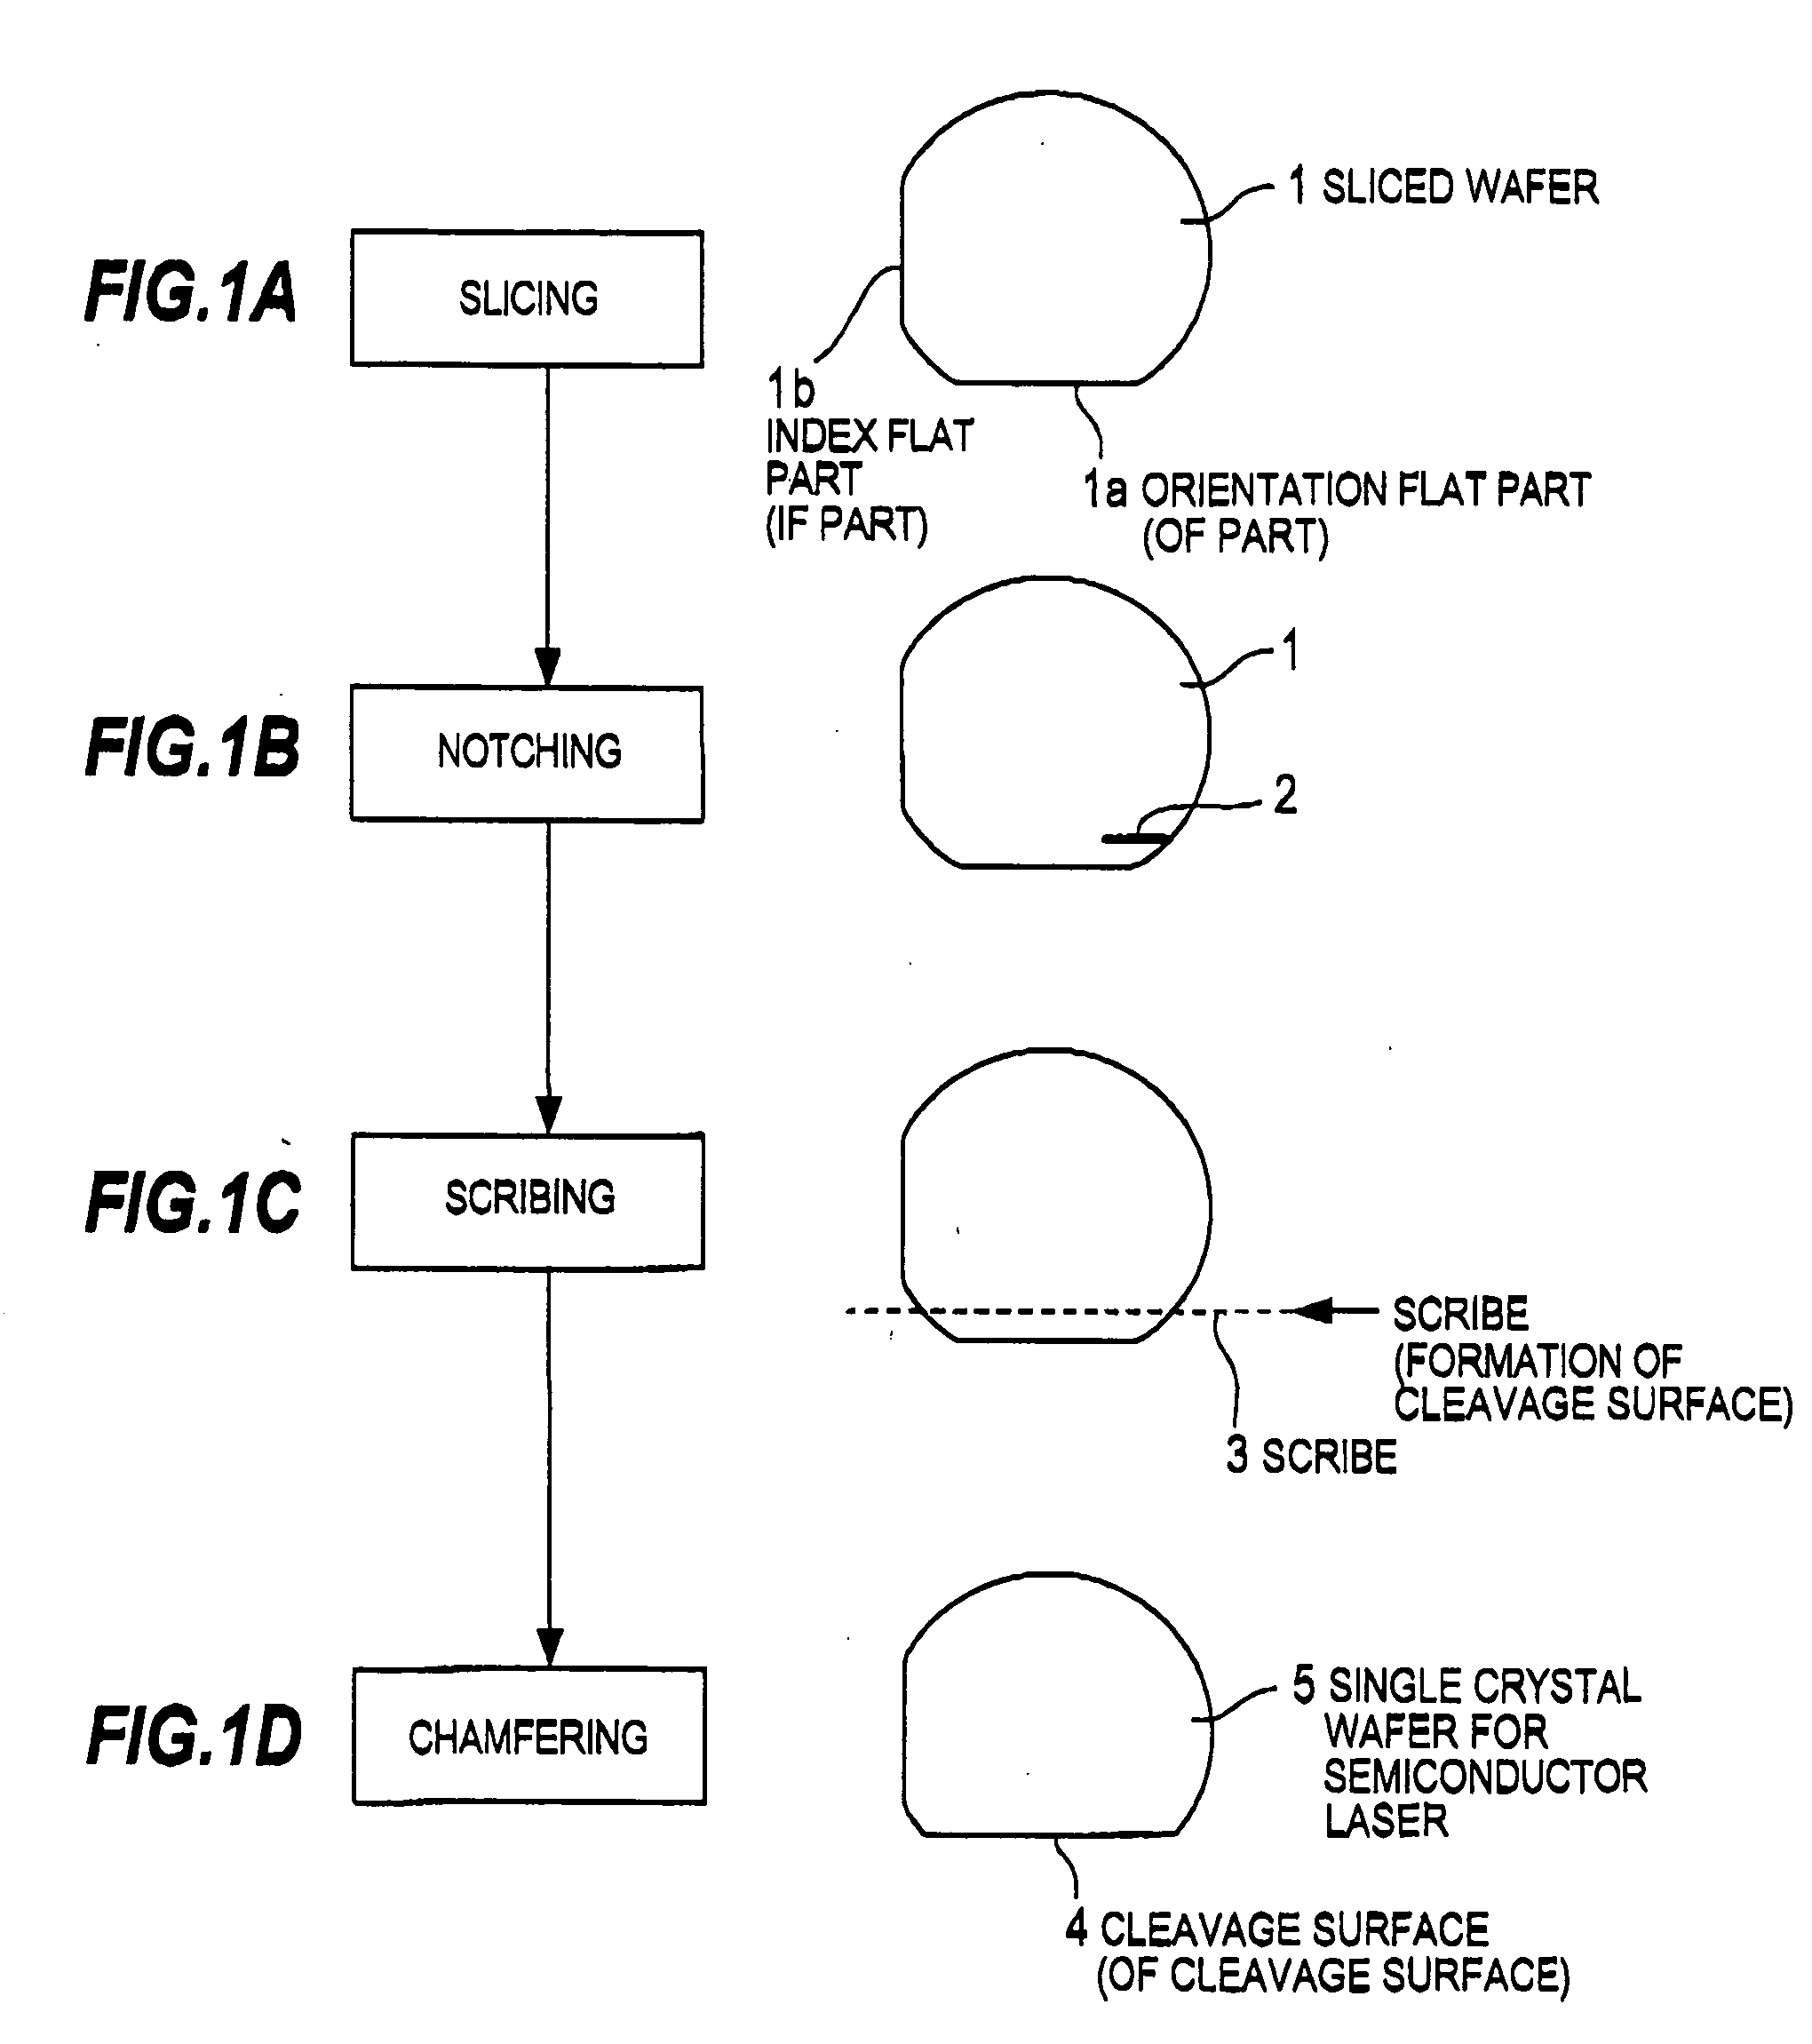 Single crystal wafer for semiconductor laser